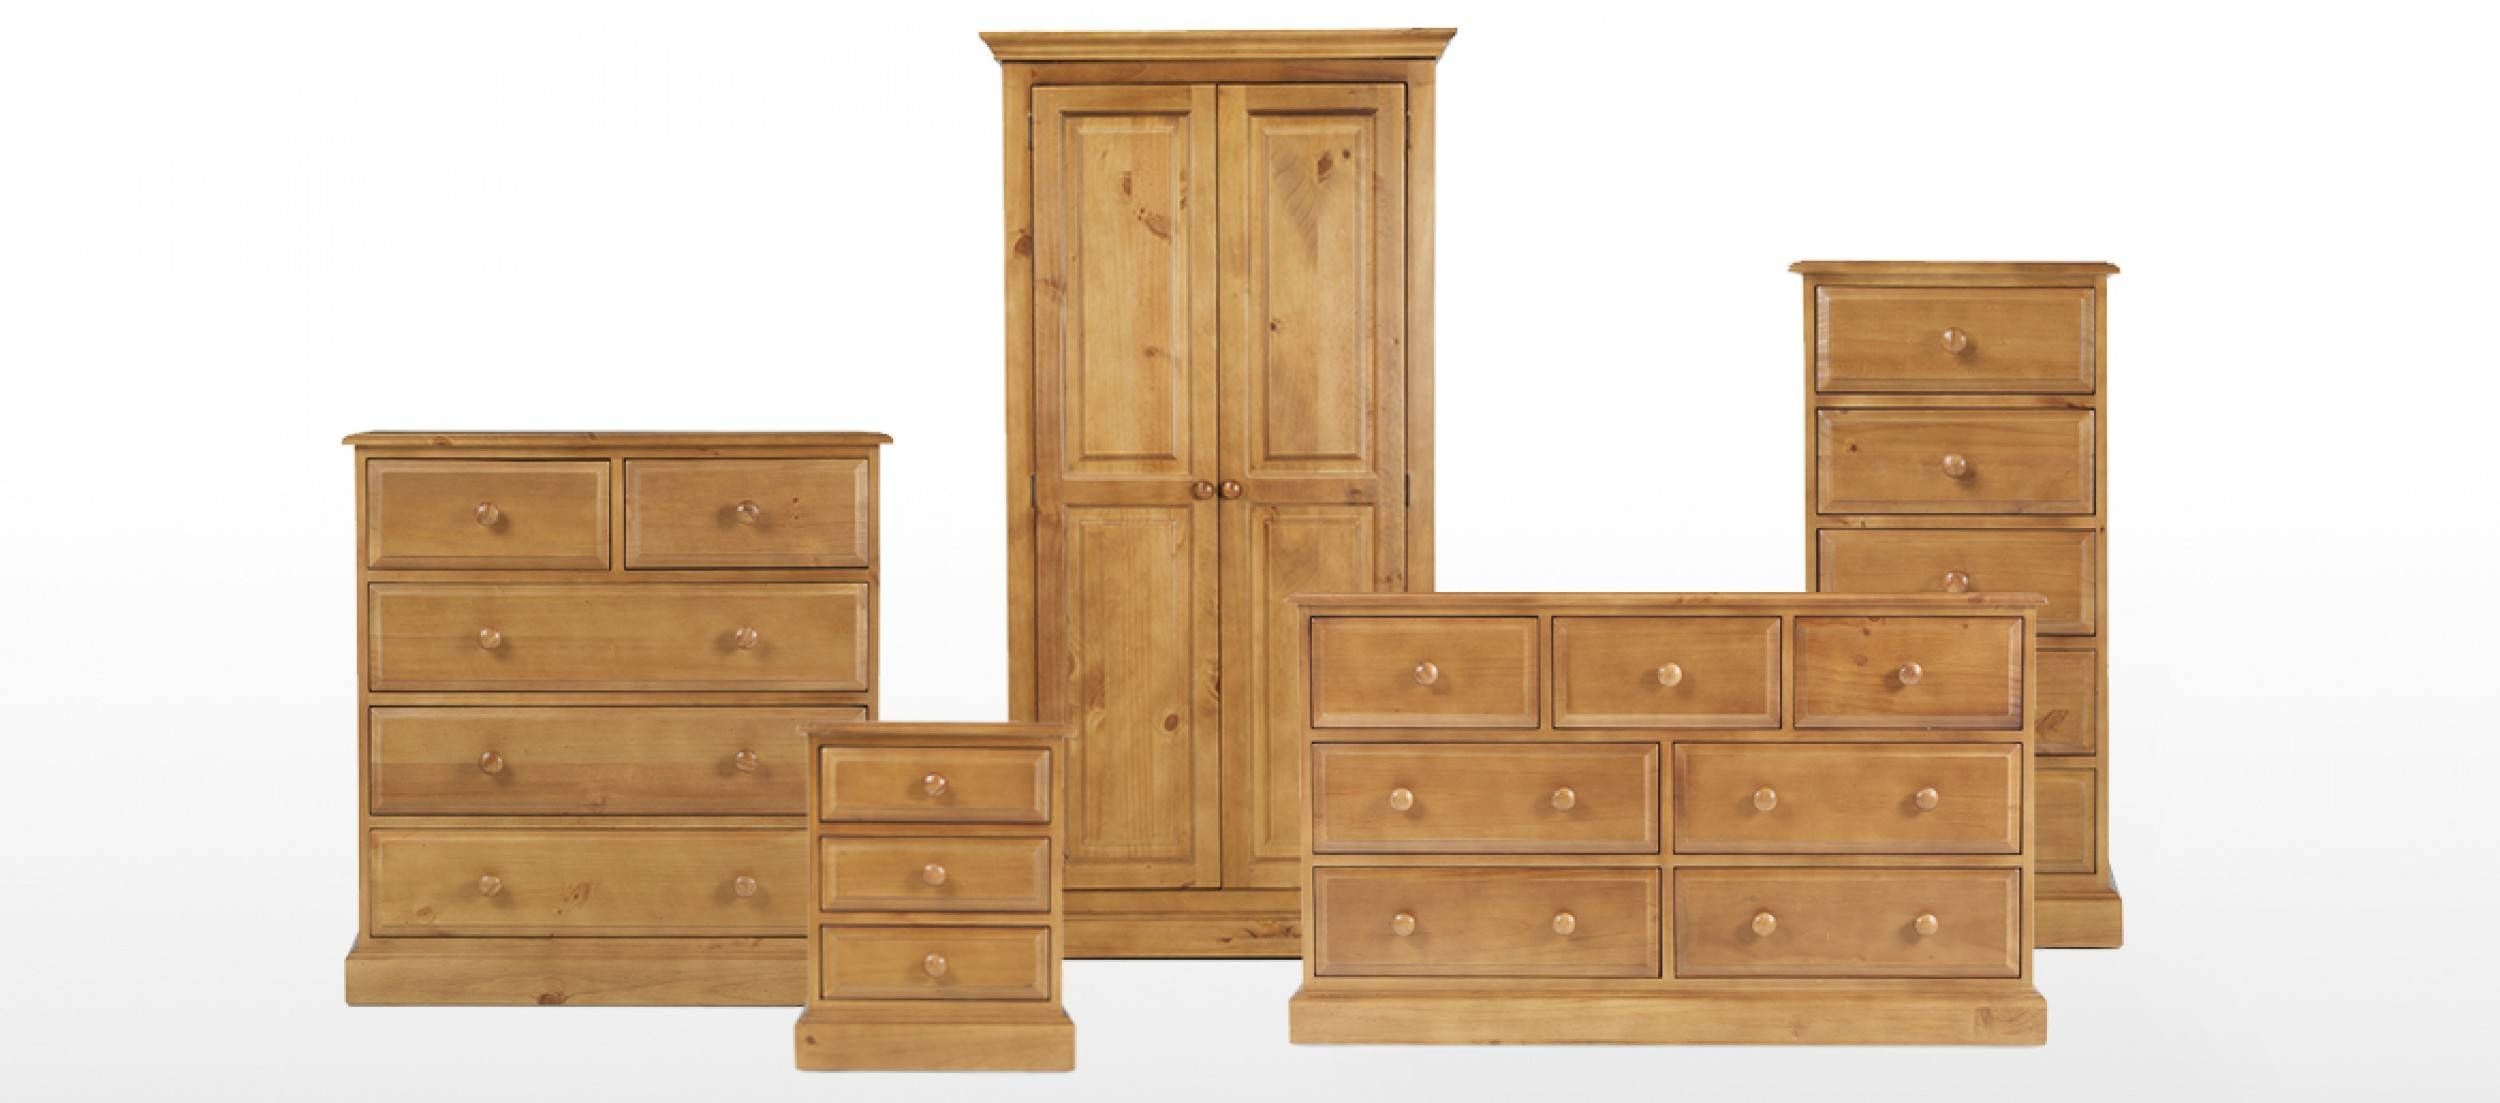 Essentials Pine Triple Wardrobe With Drawers | Quercus Living For Pine Wardrobes With Drawers (View 14 of 15)